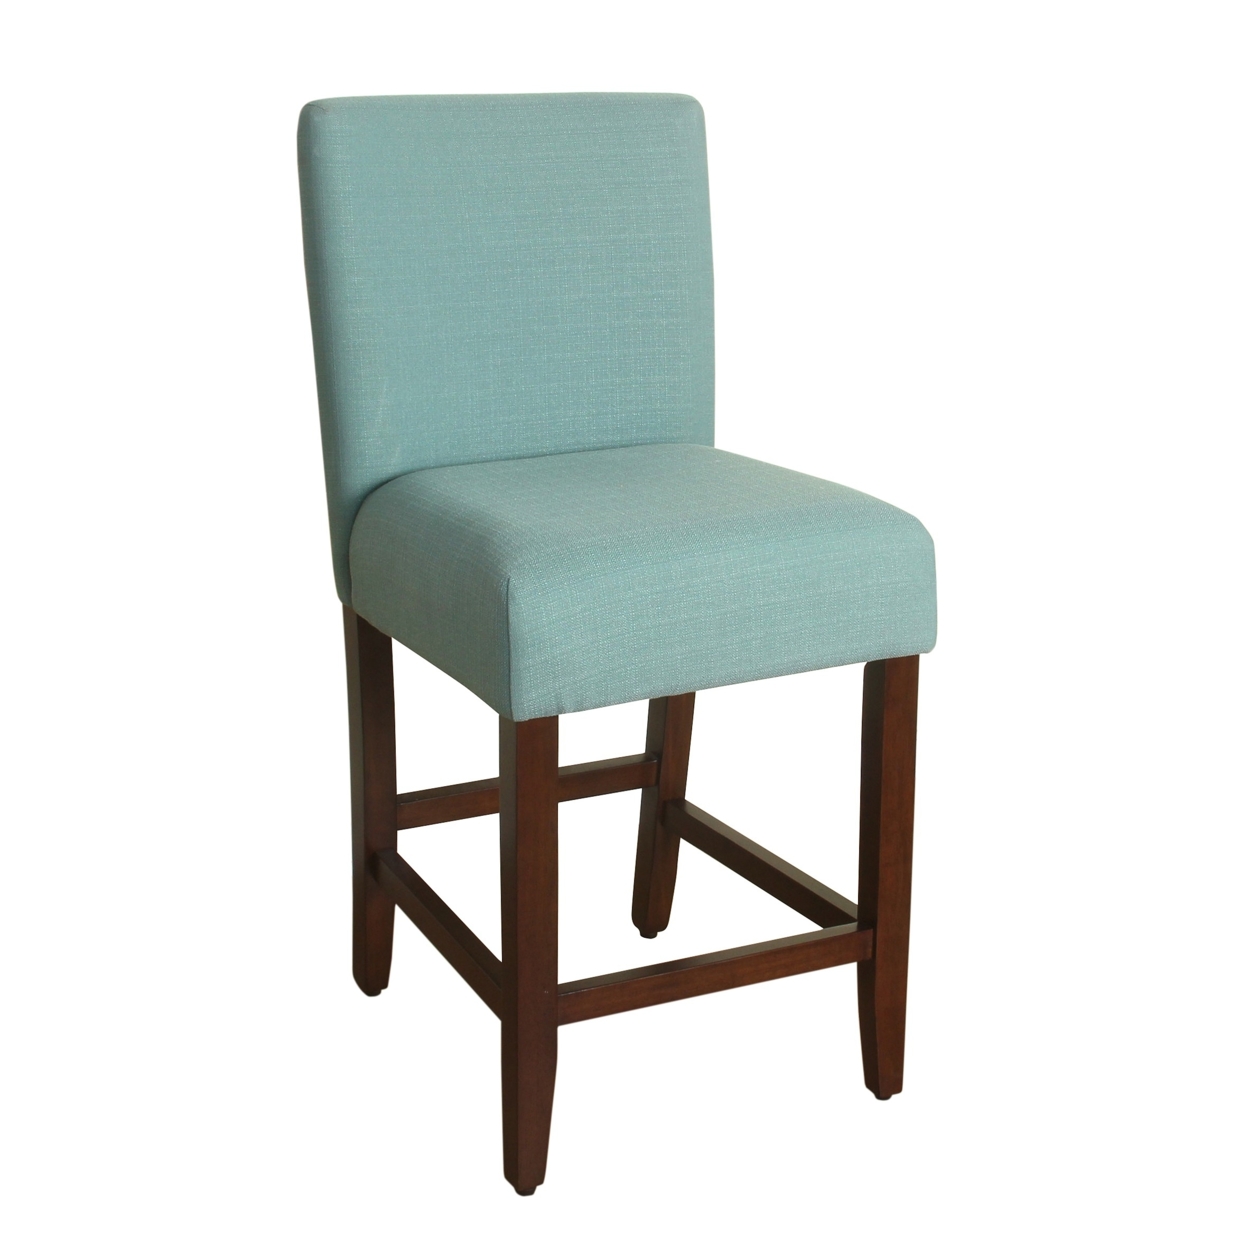 Wooden 24 Inch Counter Height Stool With In Textured Fabric Upholstery, Aqua Blue- Saltoro Sherpi